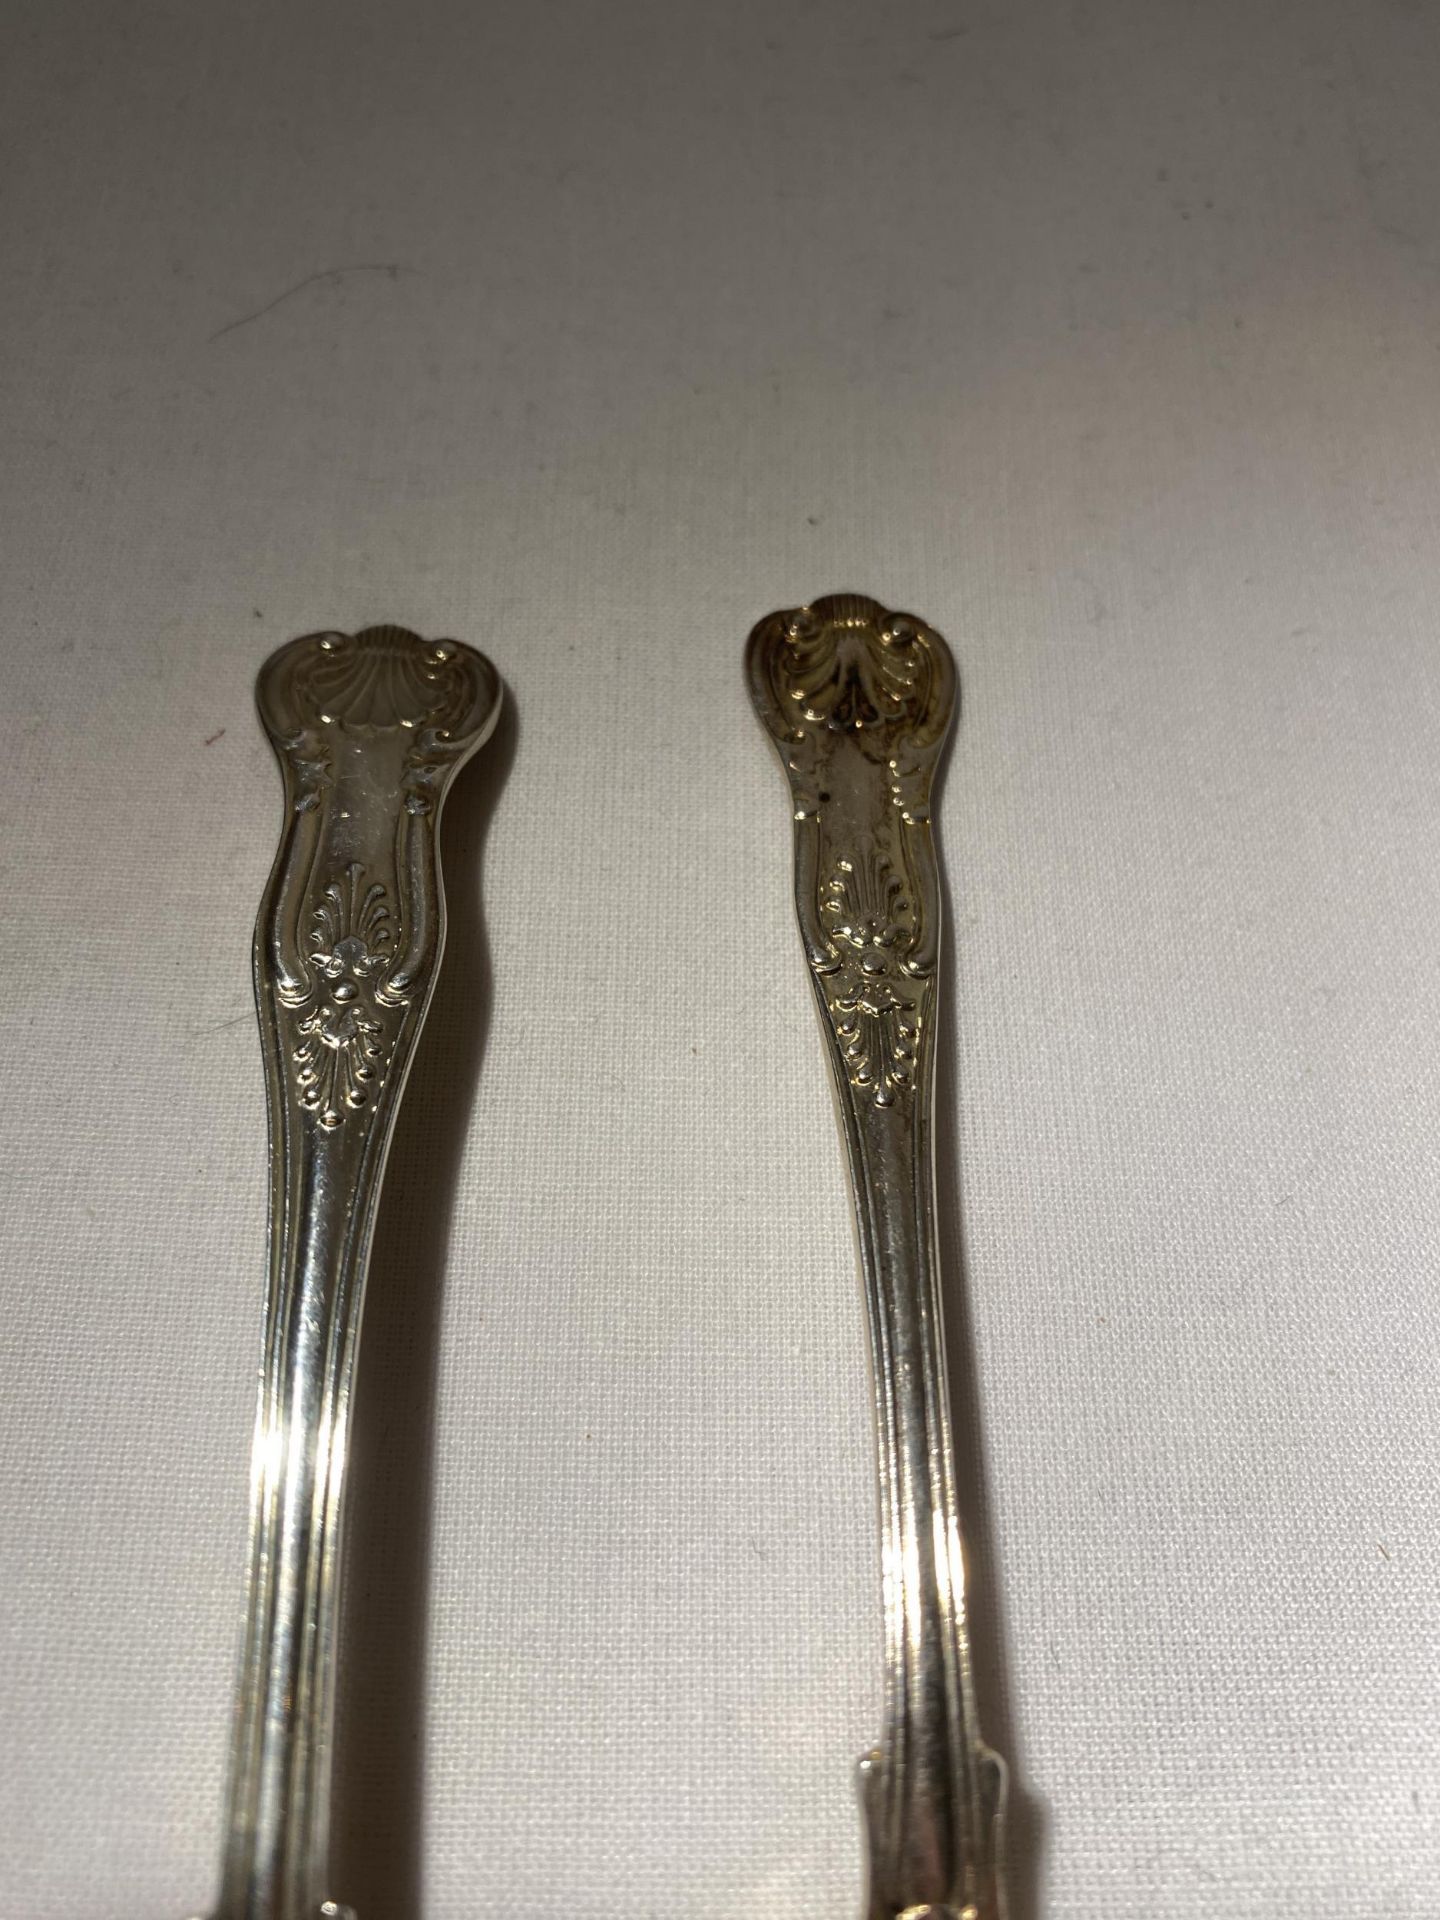 TWO SHEFFIELD HALLMARKED SILVER SPOONS, EARLIEST BEING 1925, MAKER WILLIAM HUTTON & SONS LTD, - Image 9 of 18